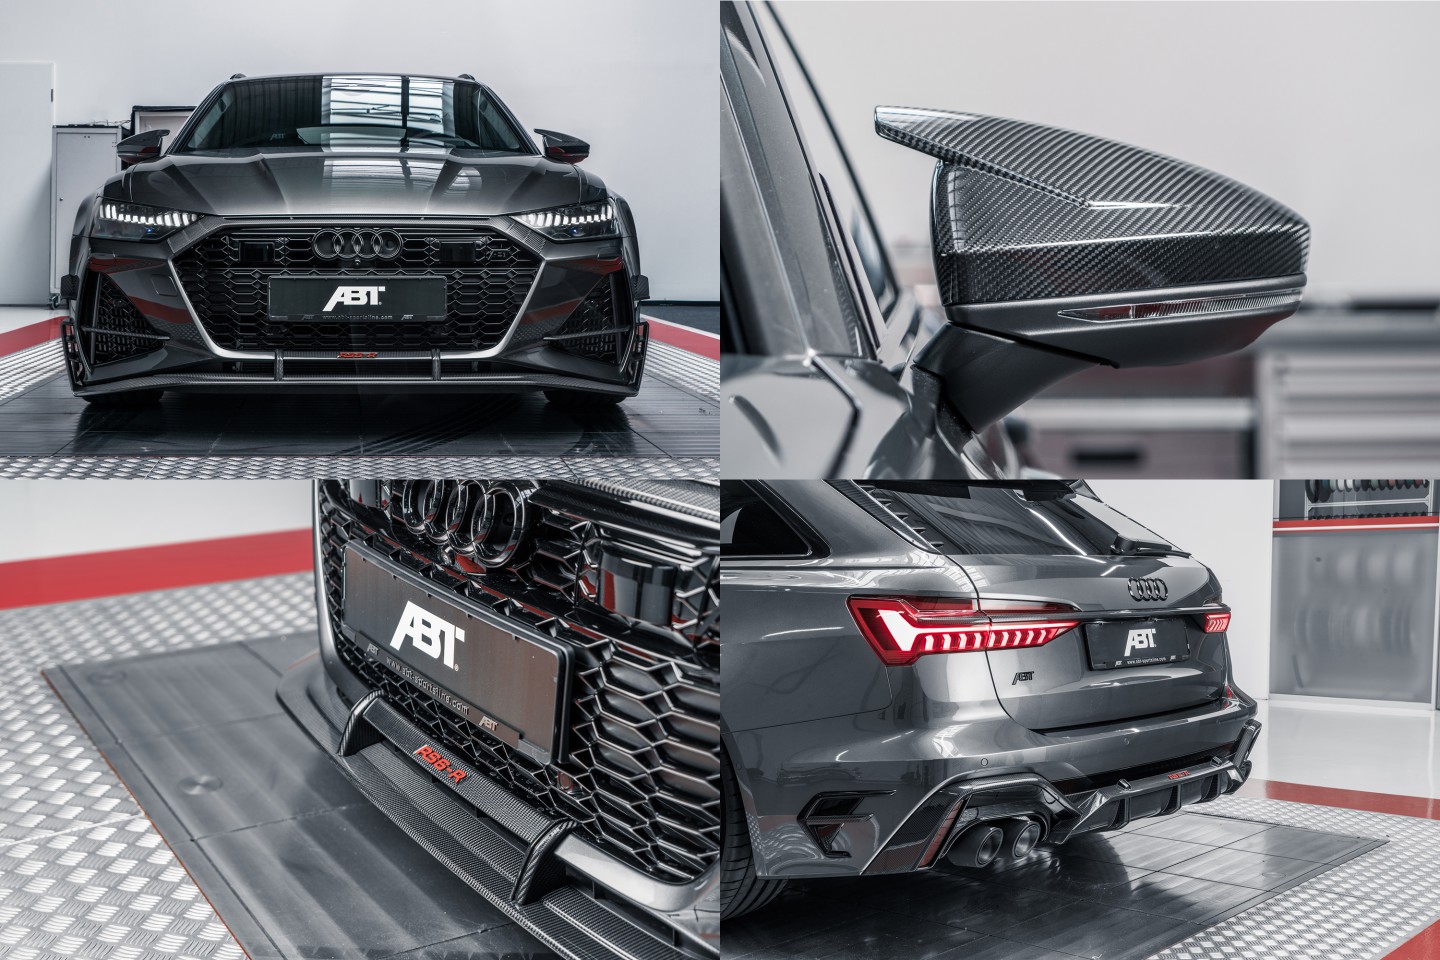 The Audi ABT RS6-R comes with a complete carbon fiber makeover of every external component